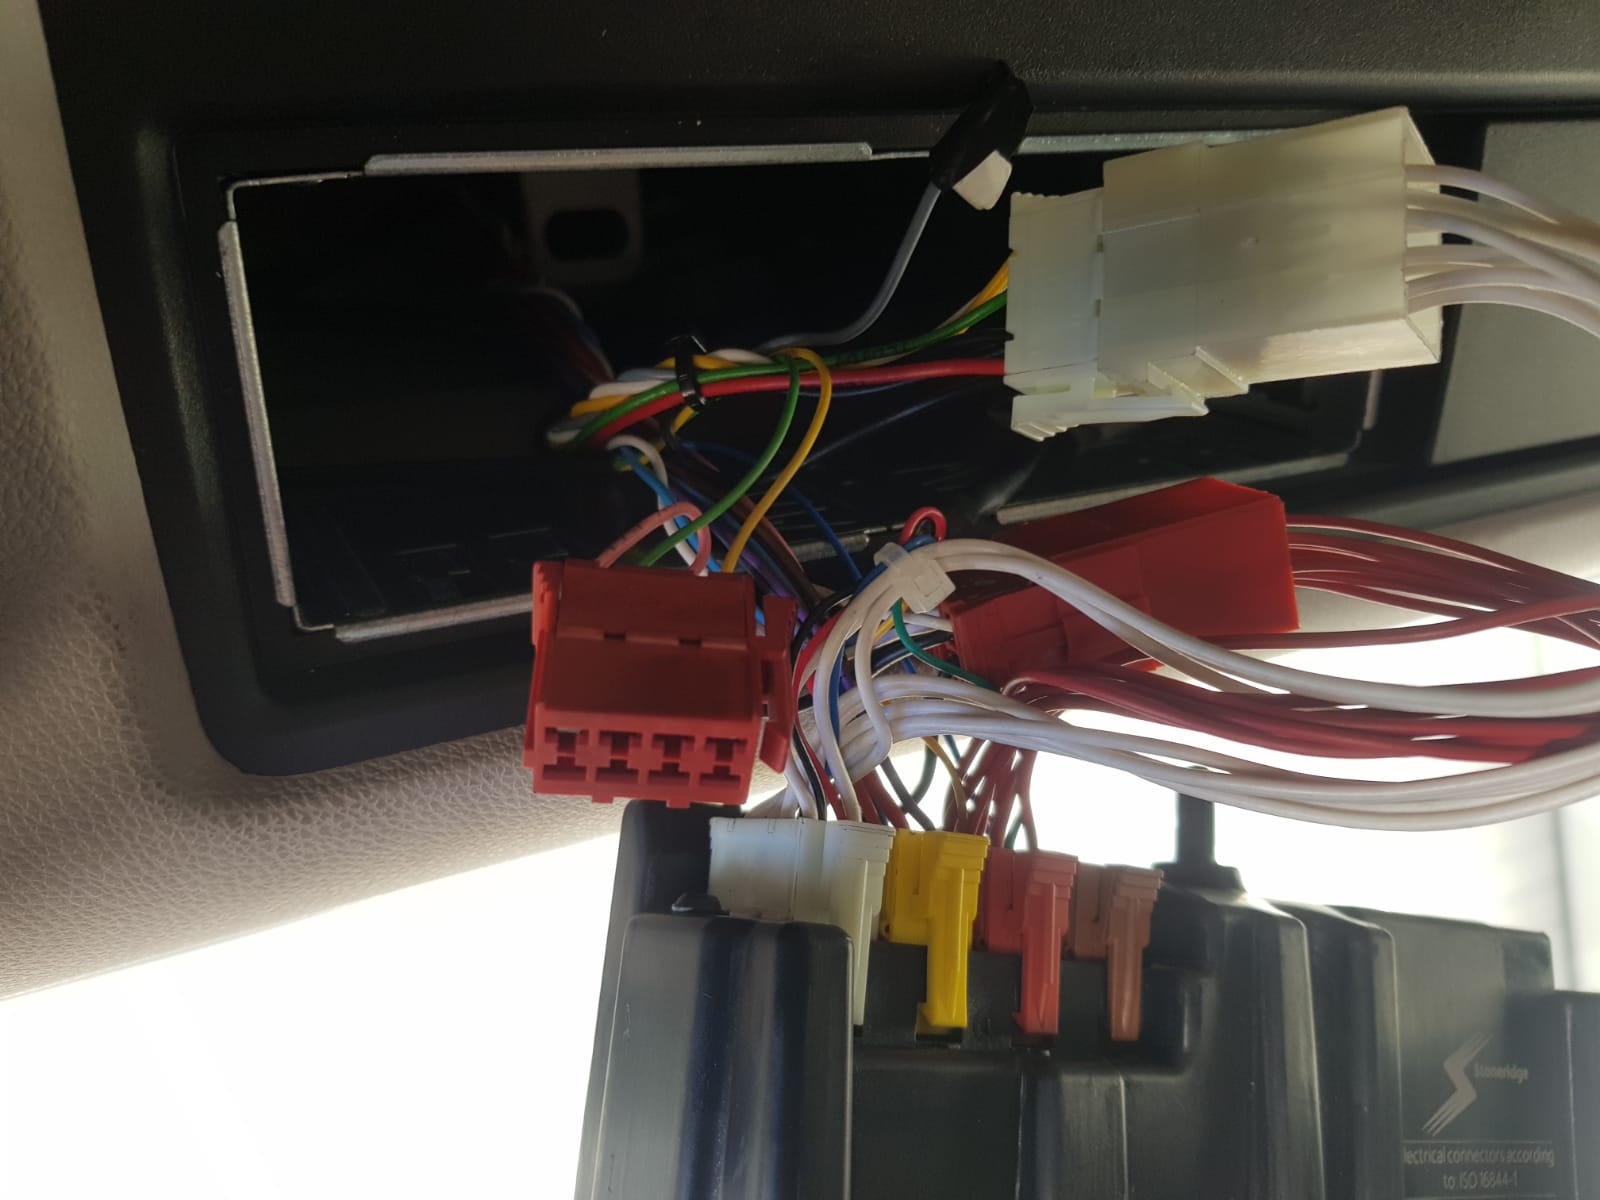 T-Harness connected to FMS vehicle CAN bus and DSRC antenna